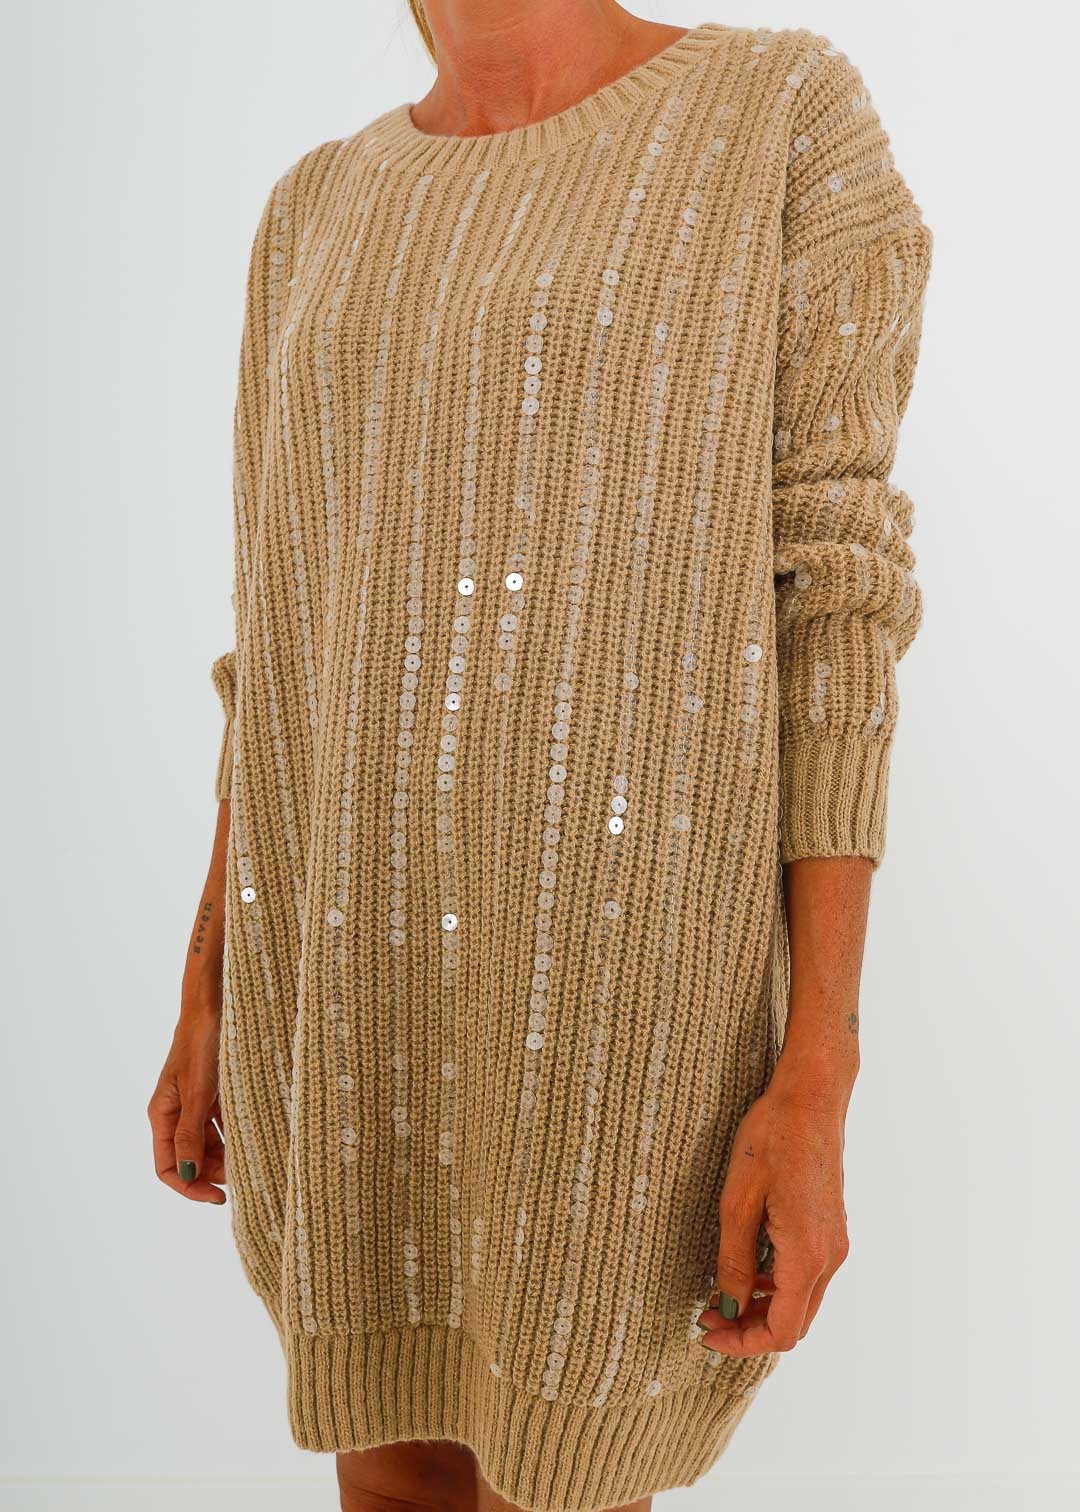 CAMEL SEQUINED KNIT DRESS